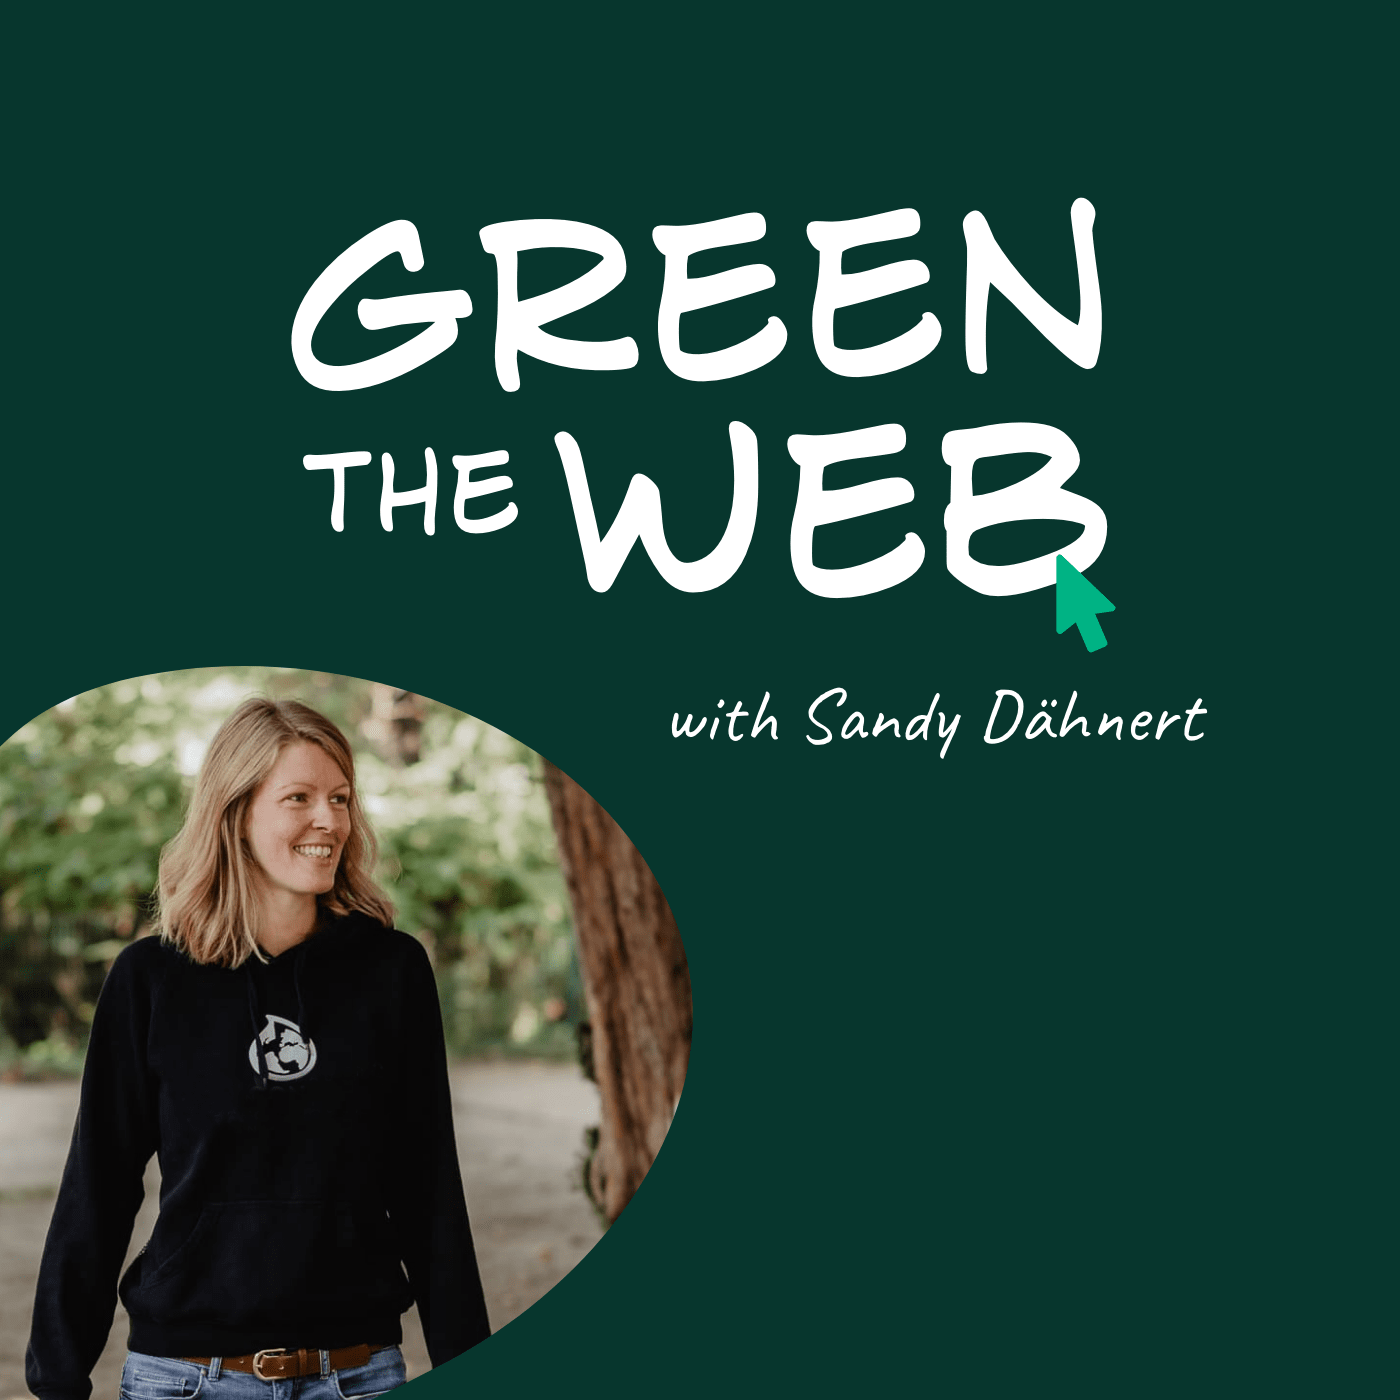 Energy efficient colors for a greener web